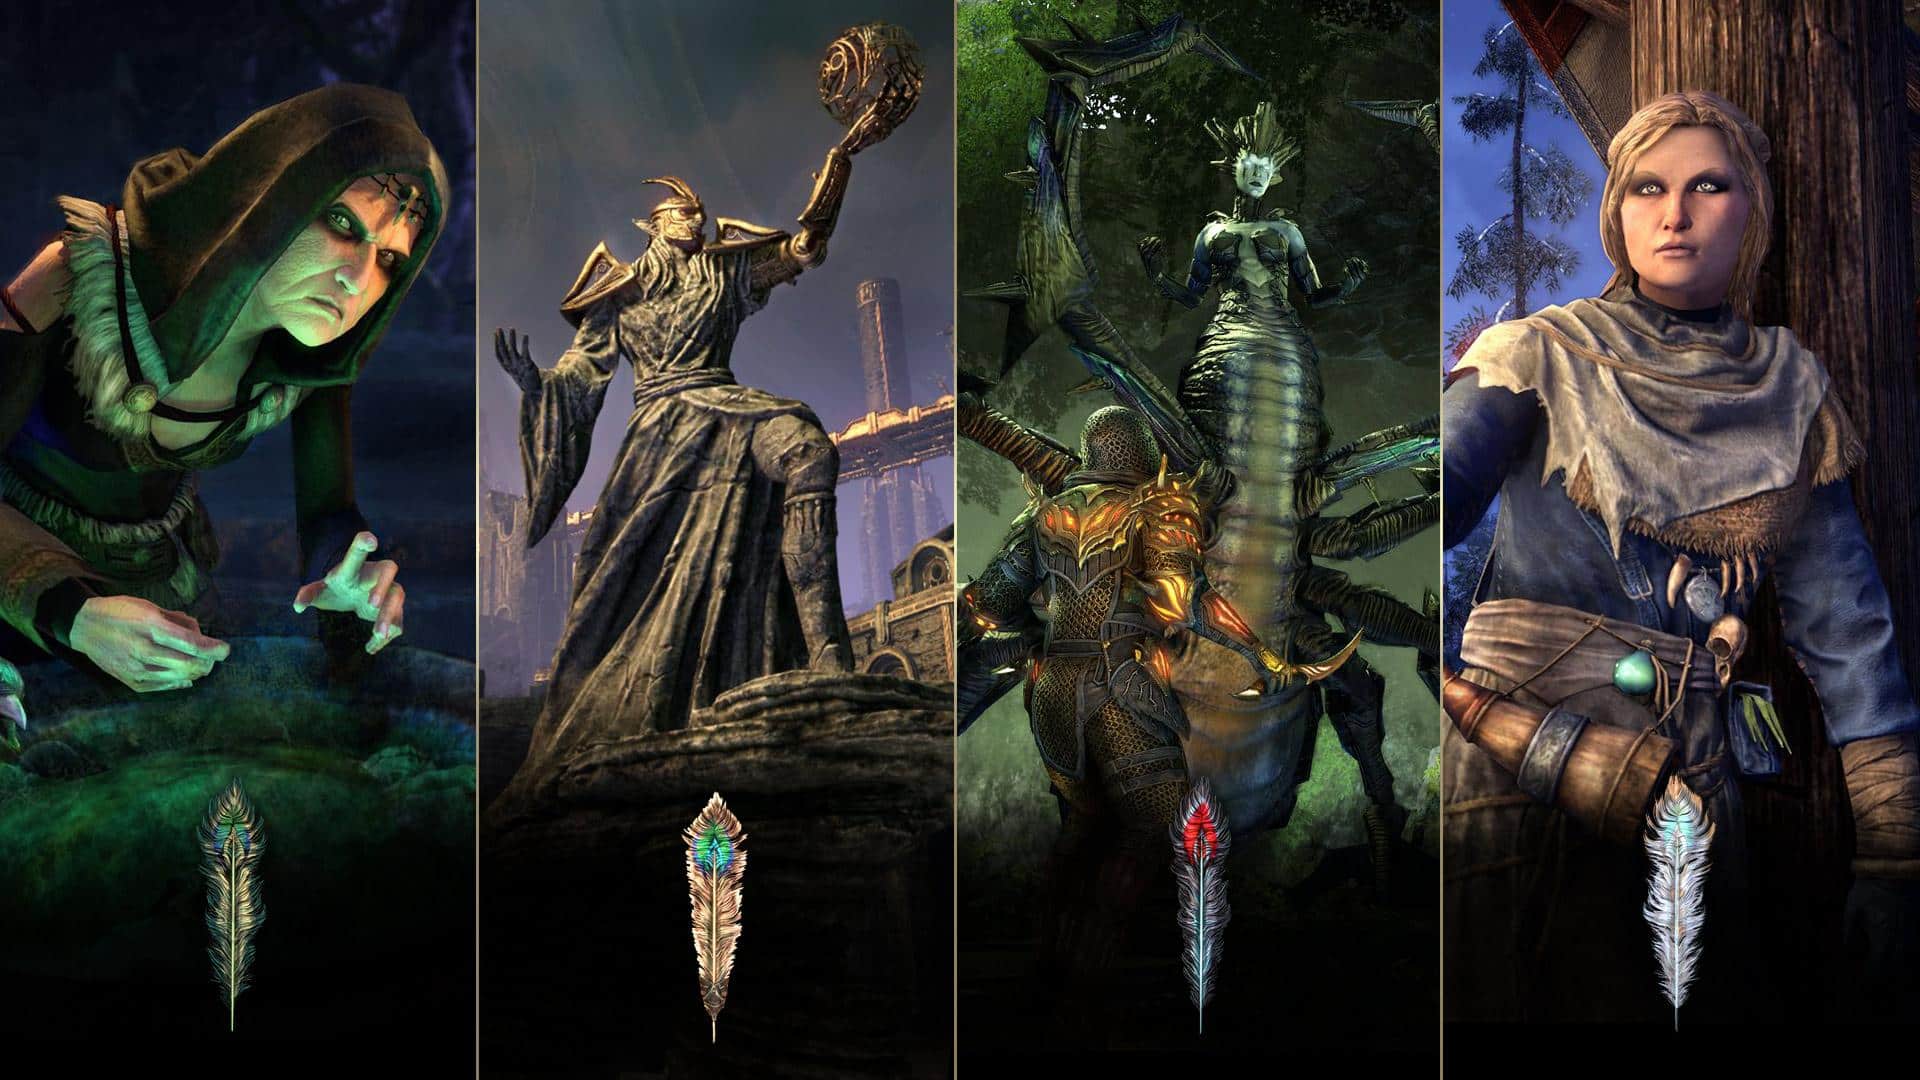 Take Part in ESO’s EndofYear Events & Unlock an Indrik Mount! The